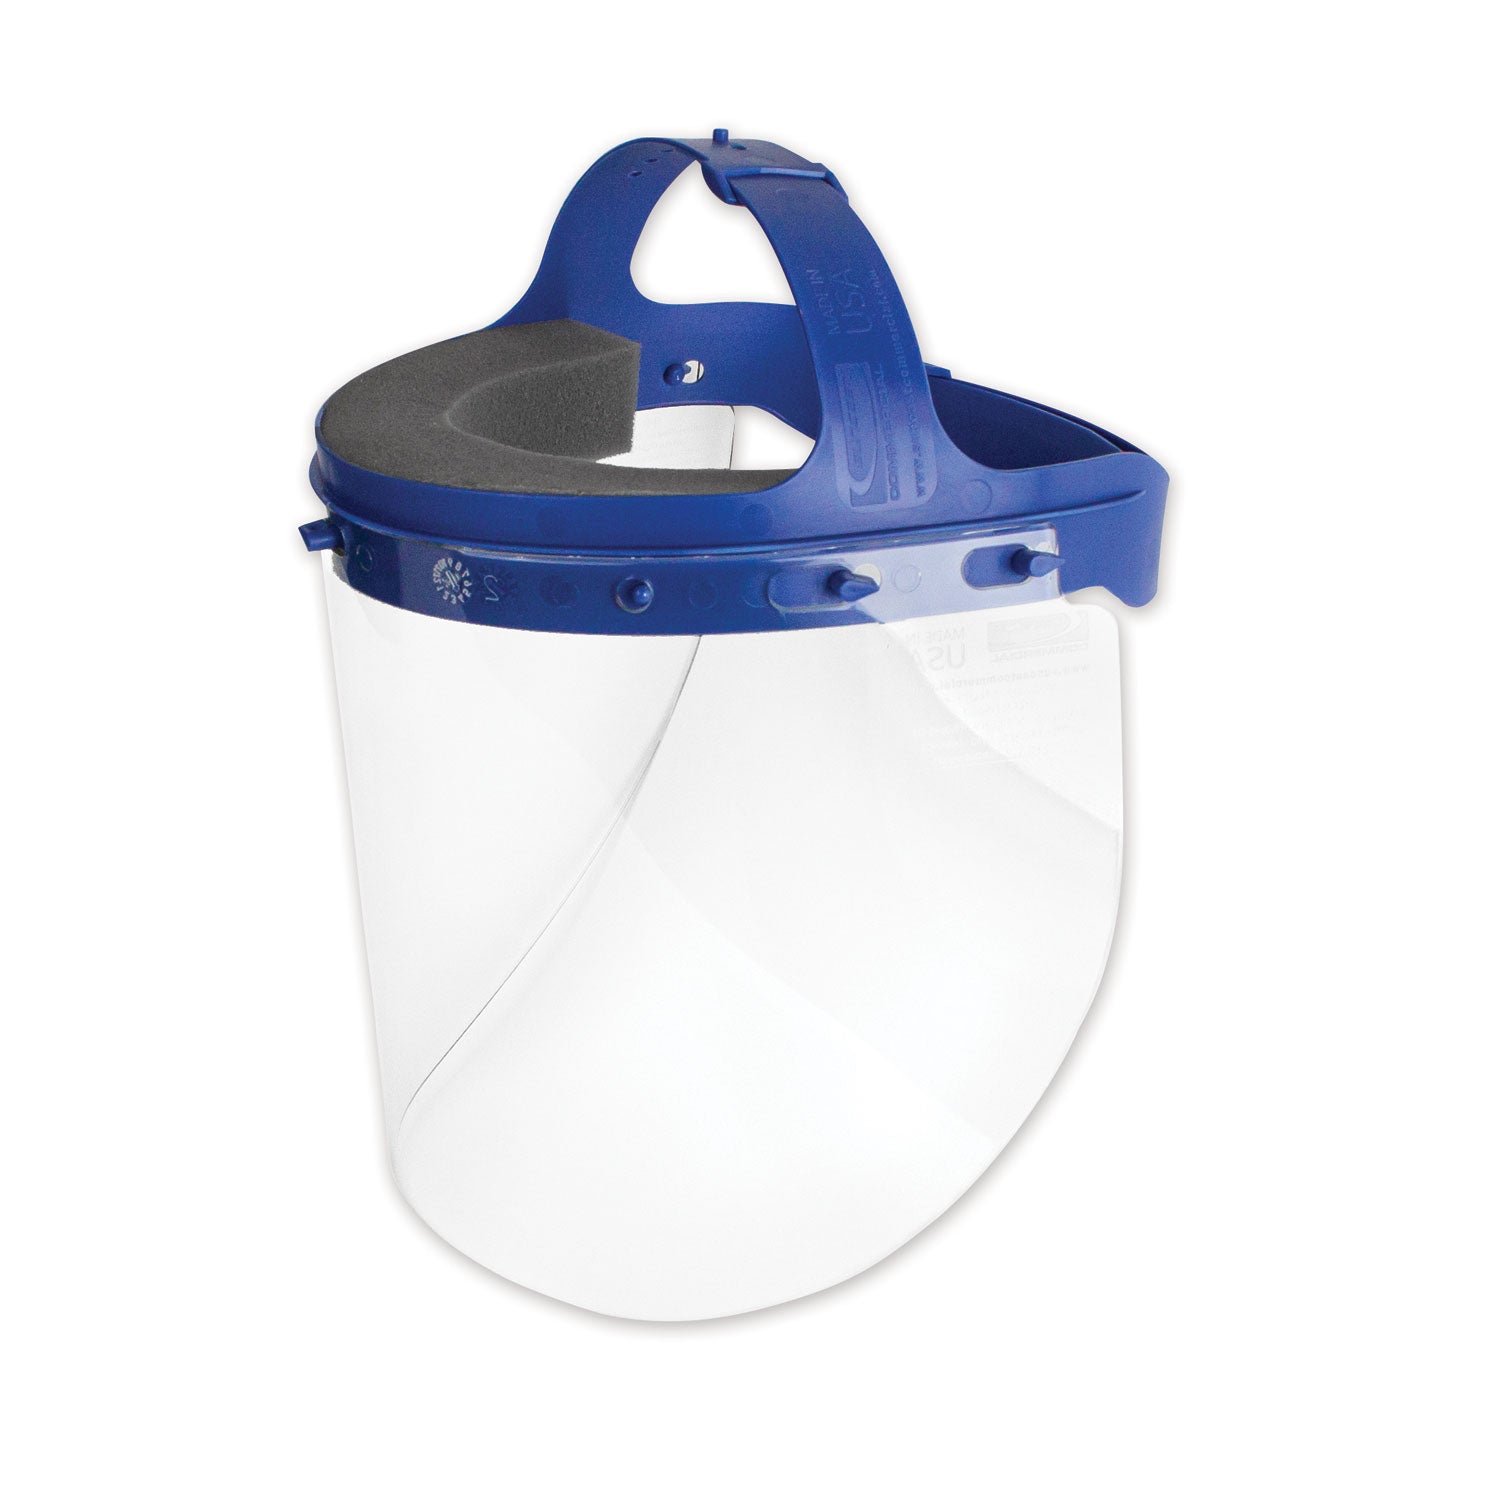 fully-assembled-full-length-face-shield-with-head-gear-165-x-1025-x-11-clear-blue-16-carton_suahgassy16 - 1